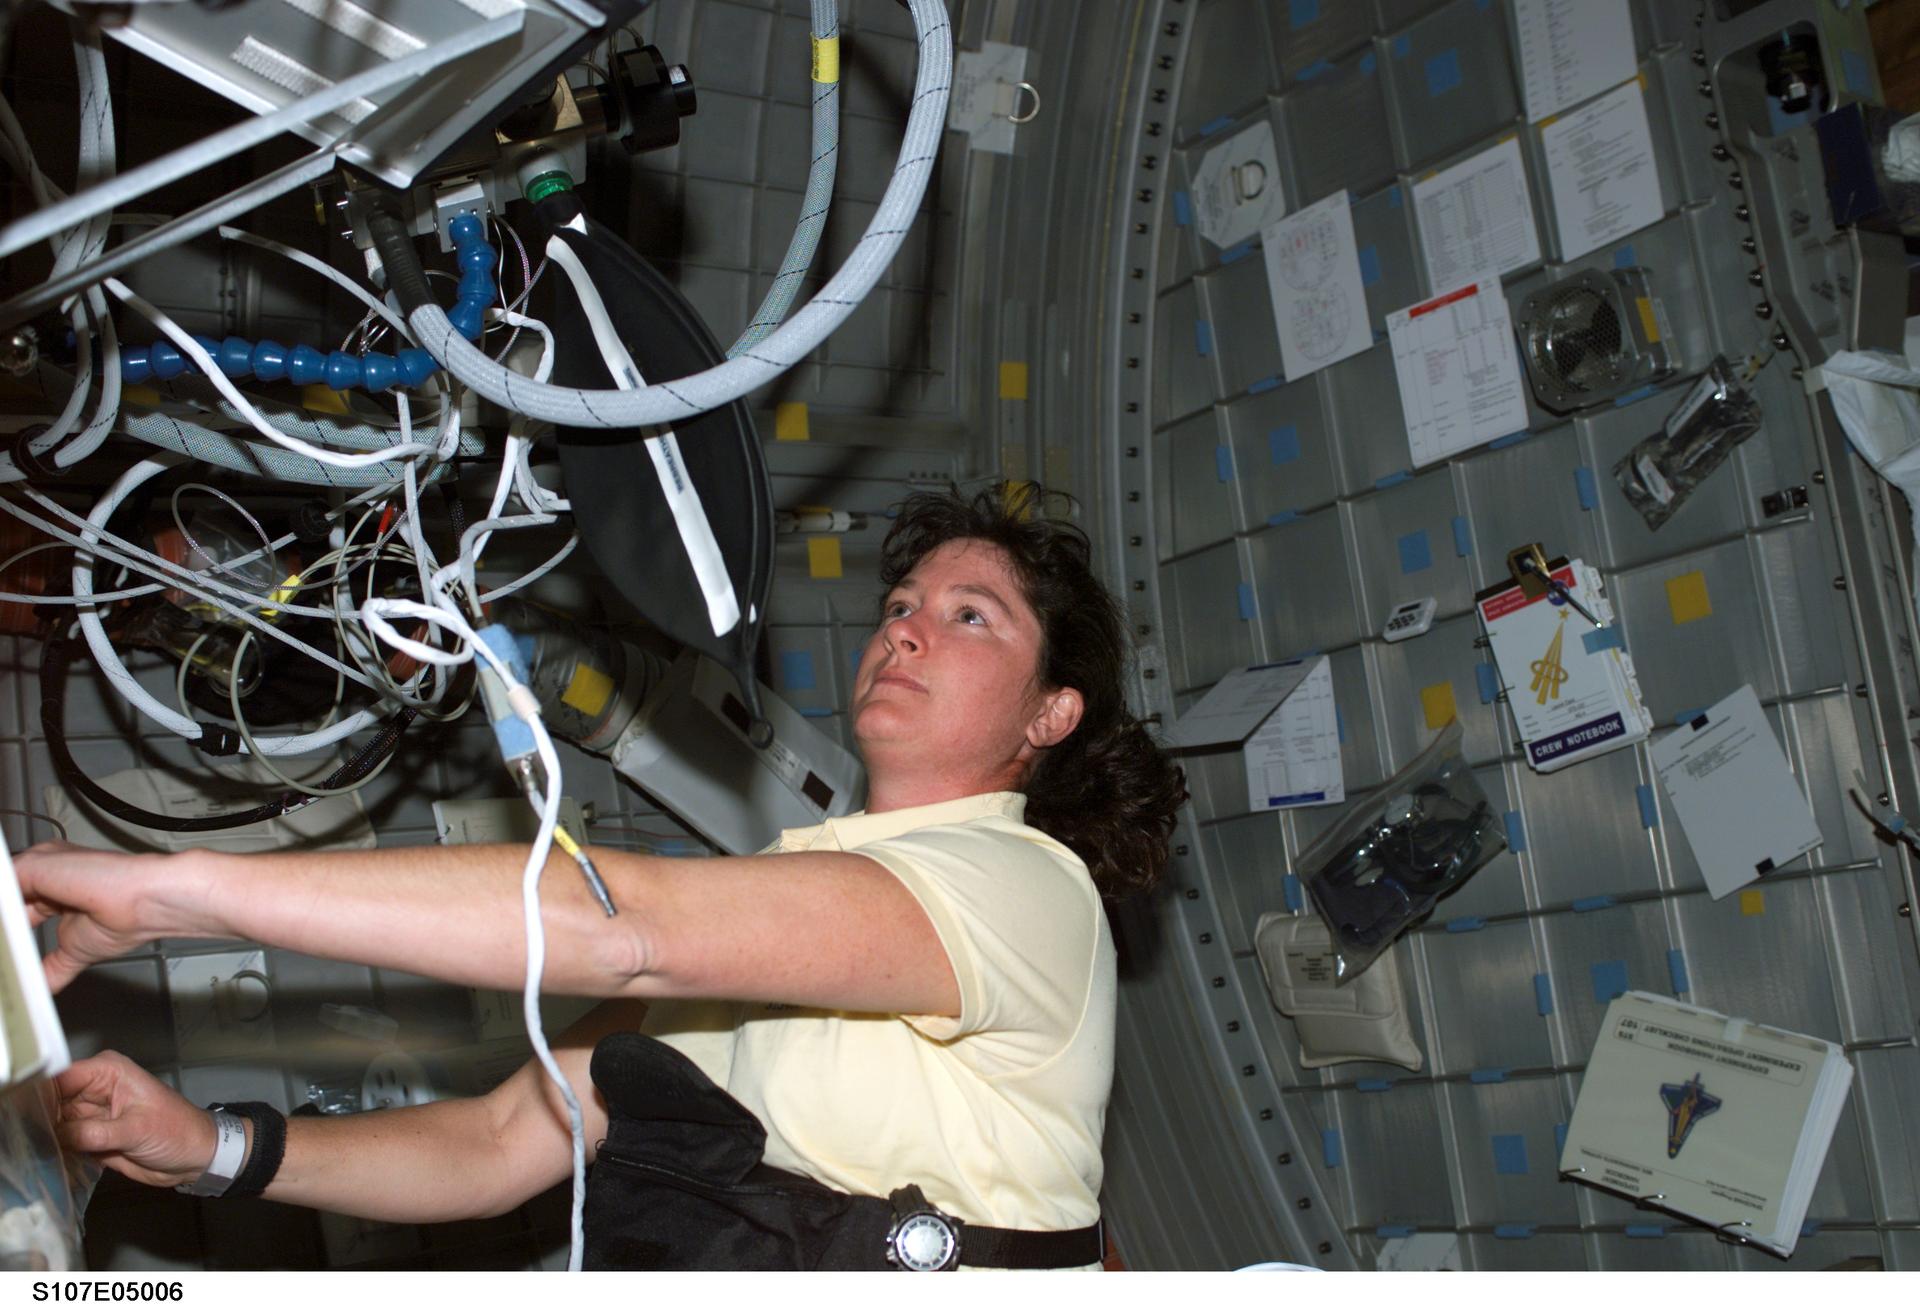 Astronaut Laurel B. Clark, STS-107 mission specialist, works in the SPACEHAB Research Double Module in the cargo bay of the Earth-orbiting Space Shuttle Columbia. (Photo courtesy of NASA)